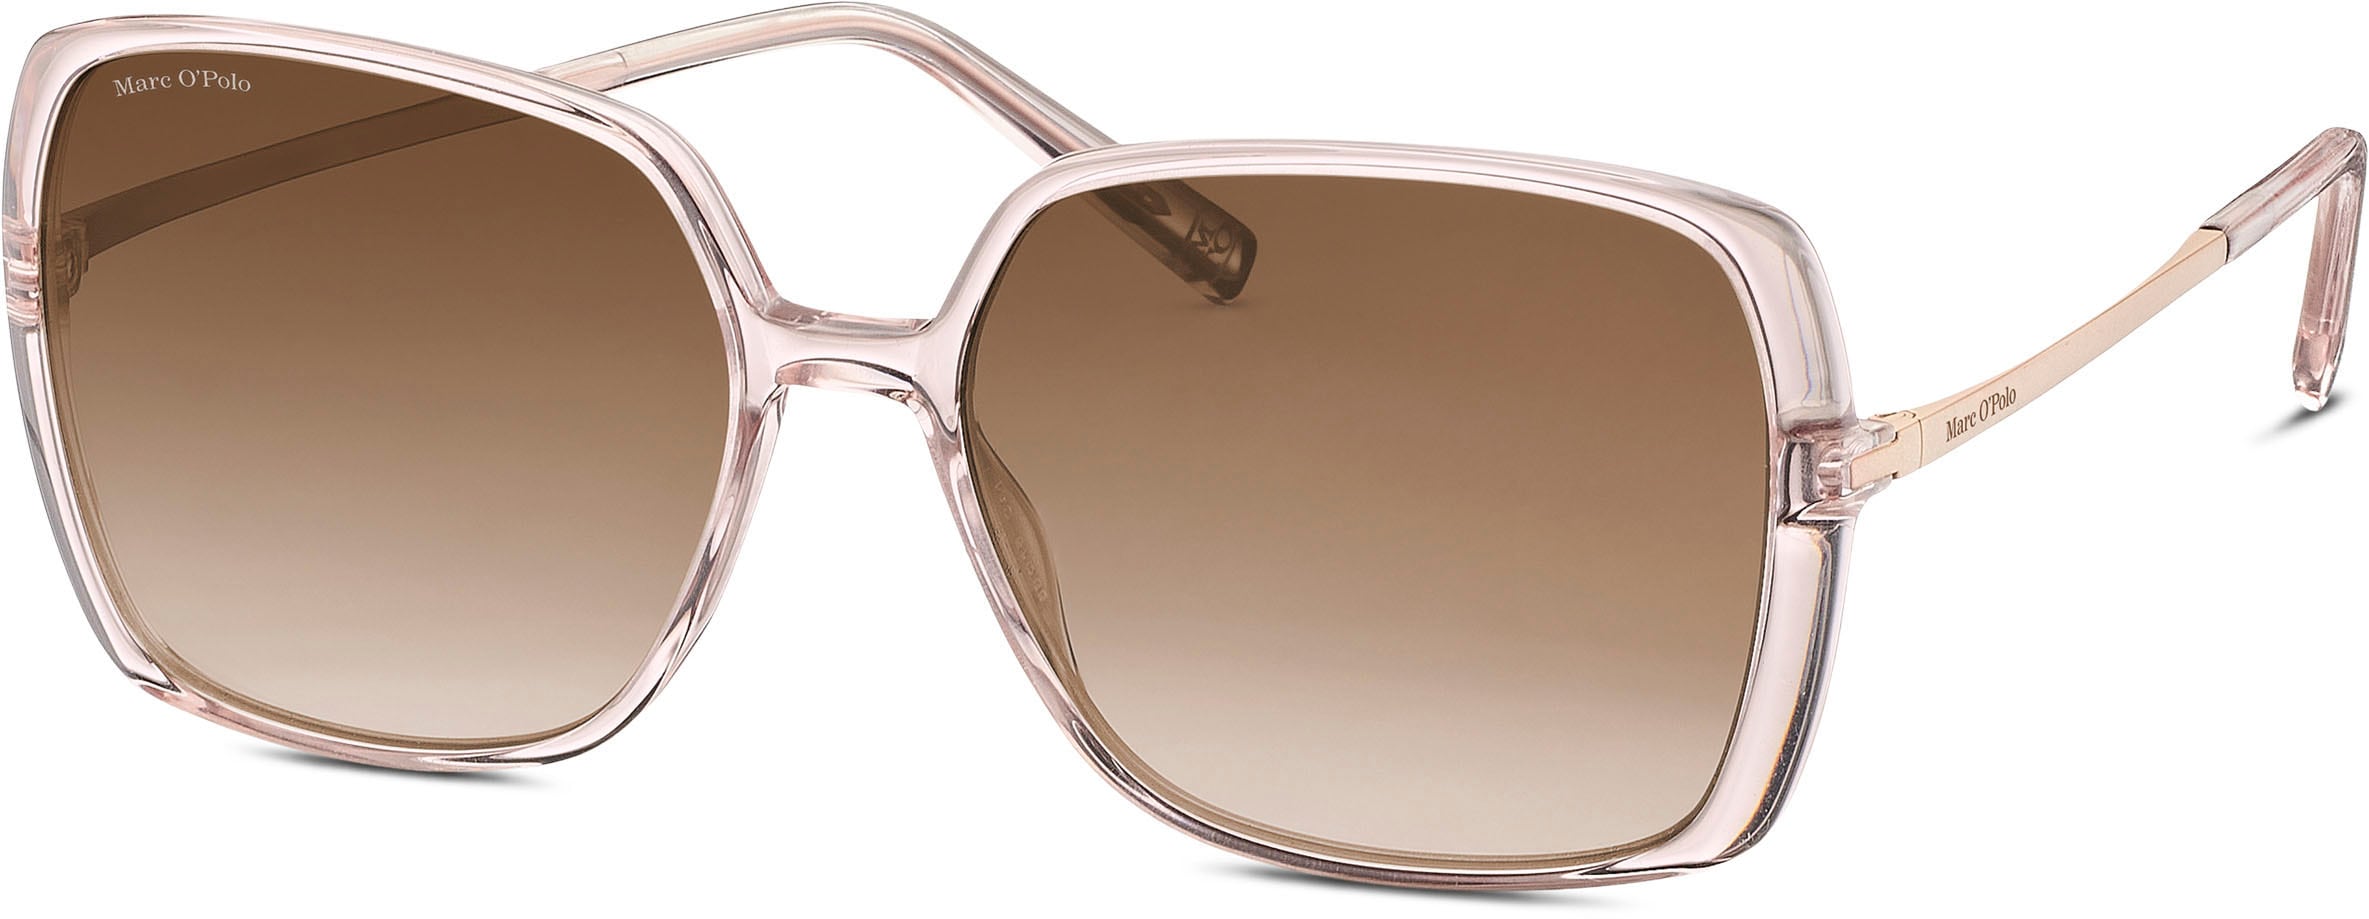 Marc O'Polo Sonnenbrille »Modell 506190«, Karree-From bei OTTO